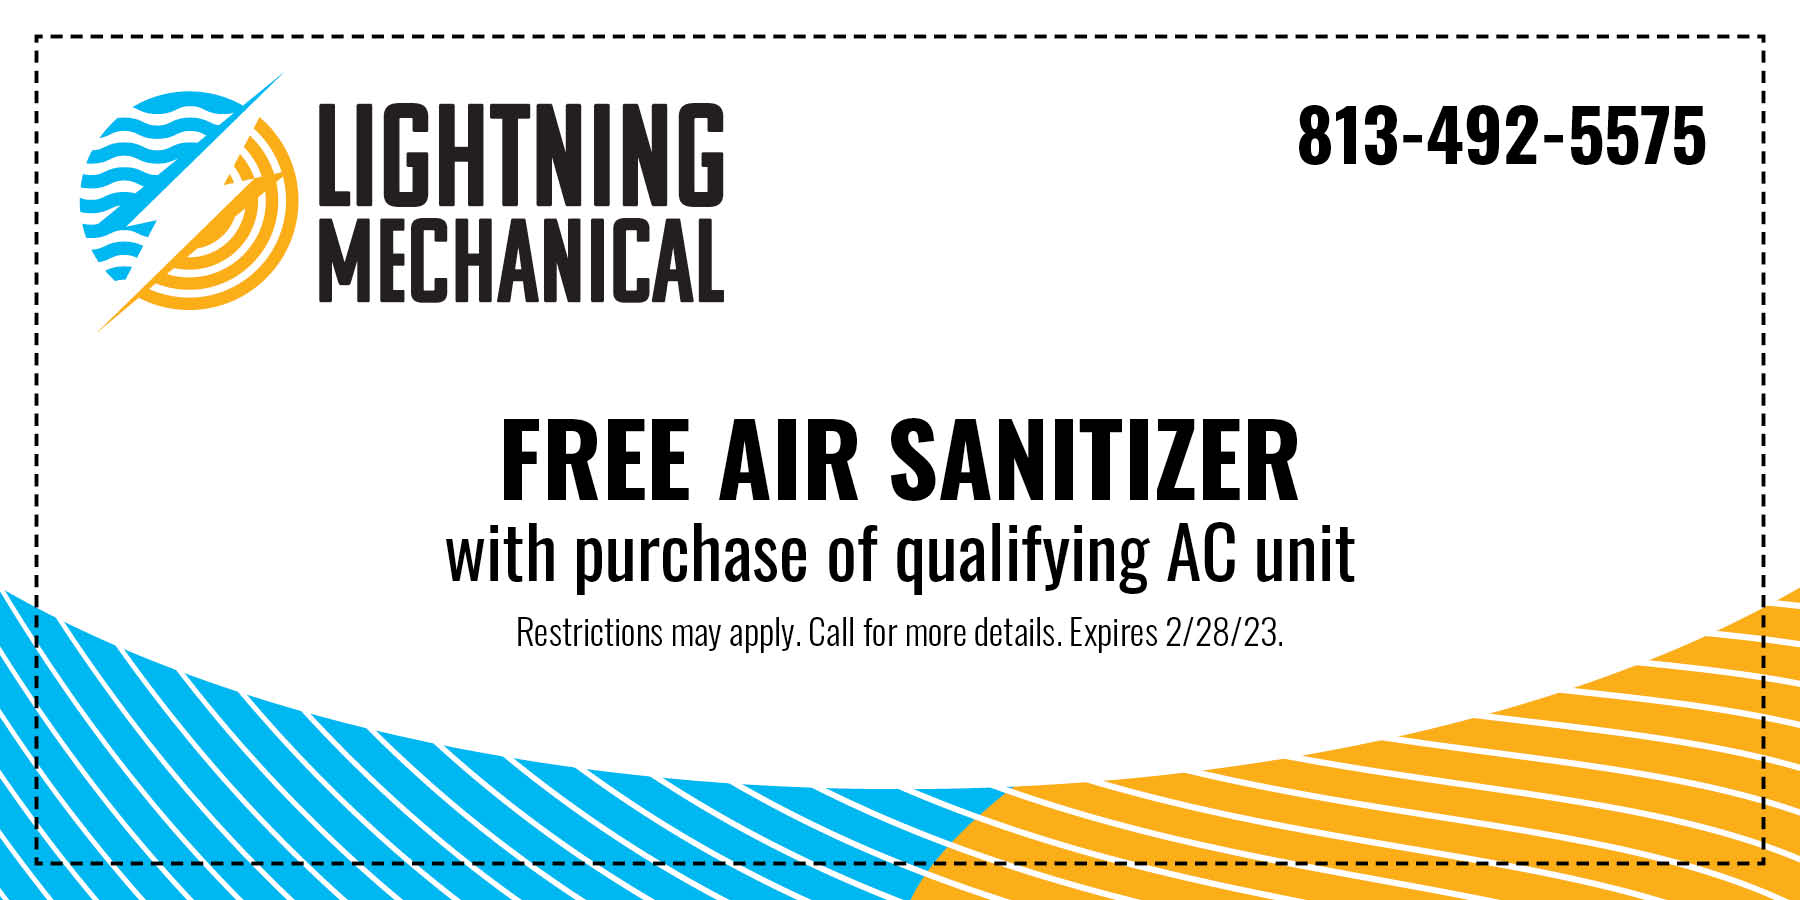 Free air sanitizer with purchase of qualifying AC unit expires 2/28/2023.